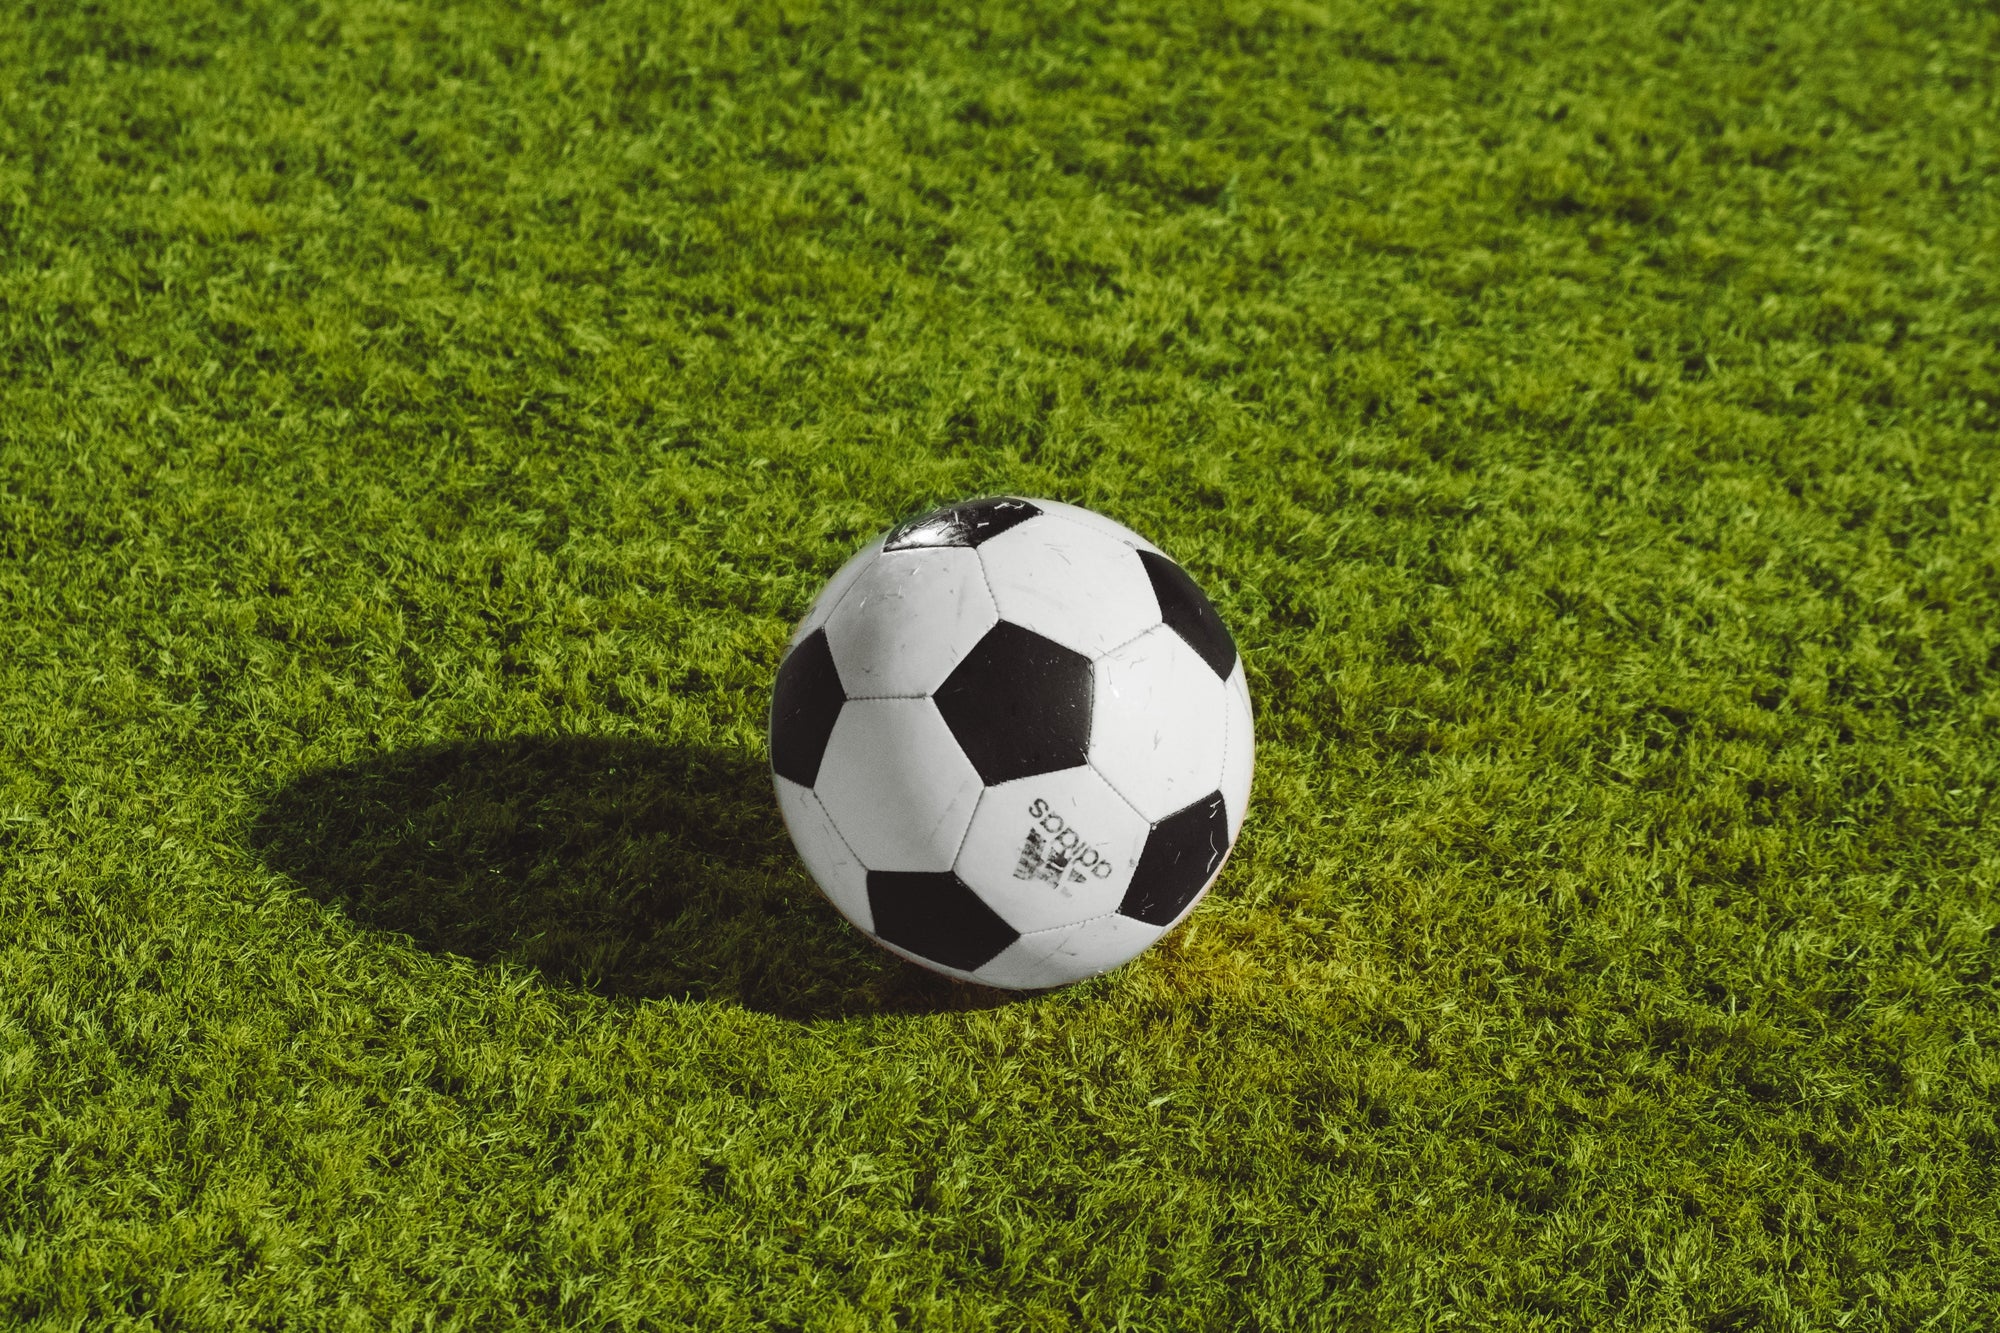 Top 5 Things To Look For When Choosing A Soccer Ball